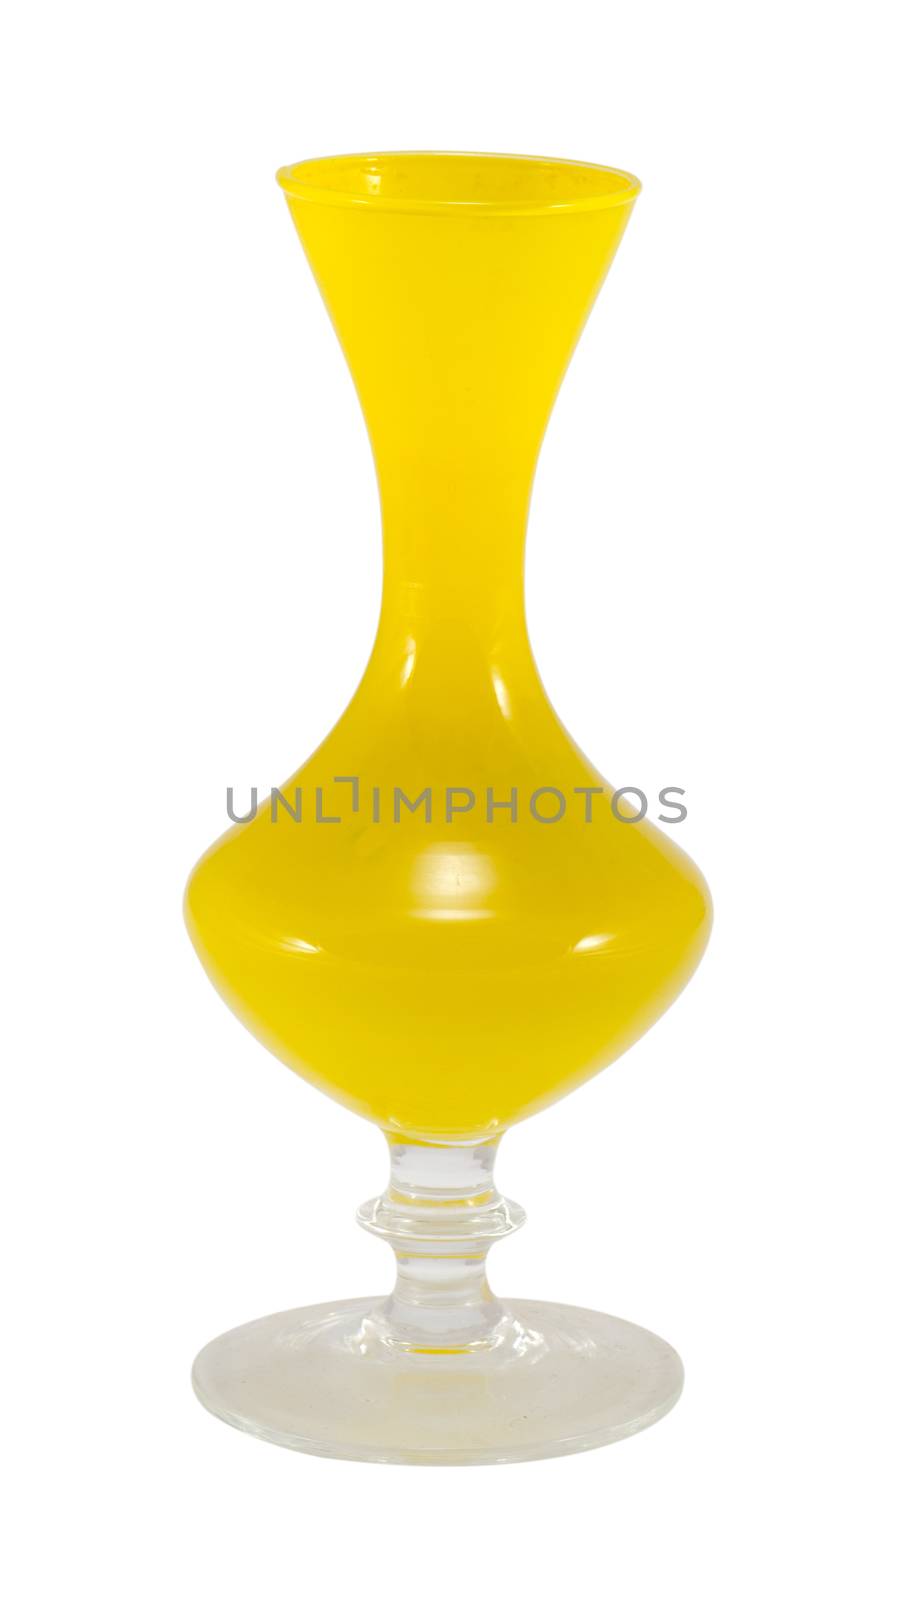 vintage glass yellow curvy vase isolated on white. old decorative object.